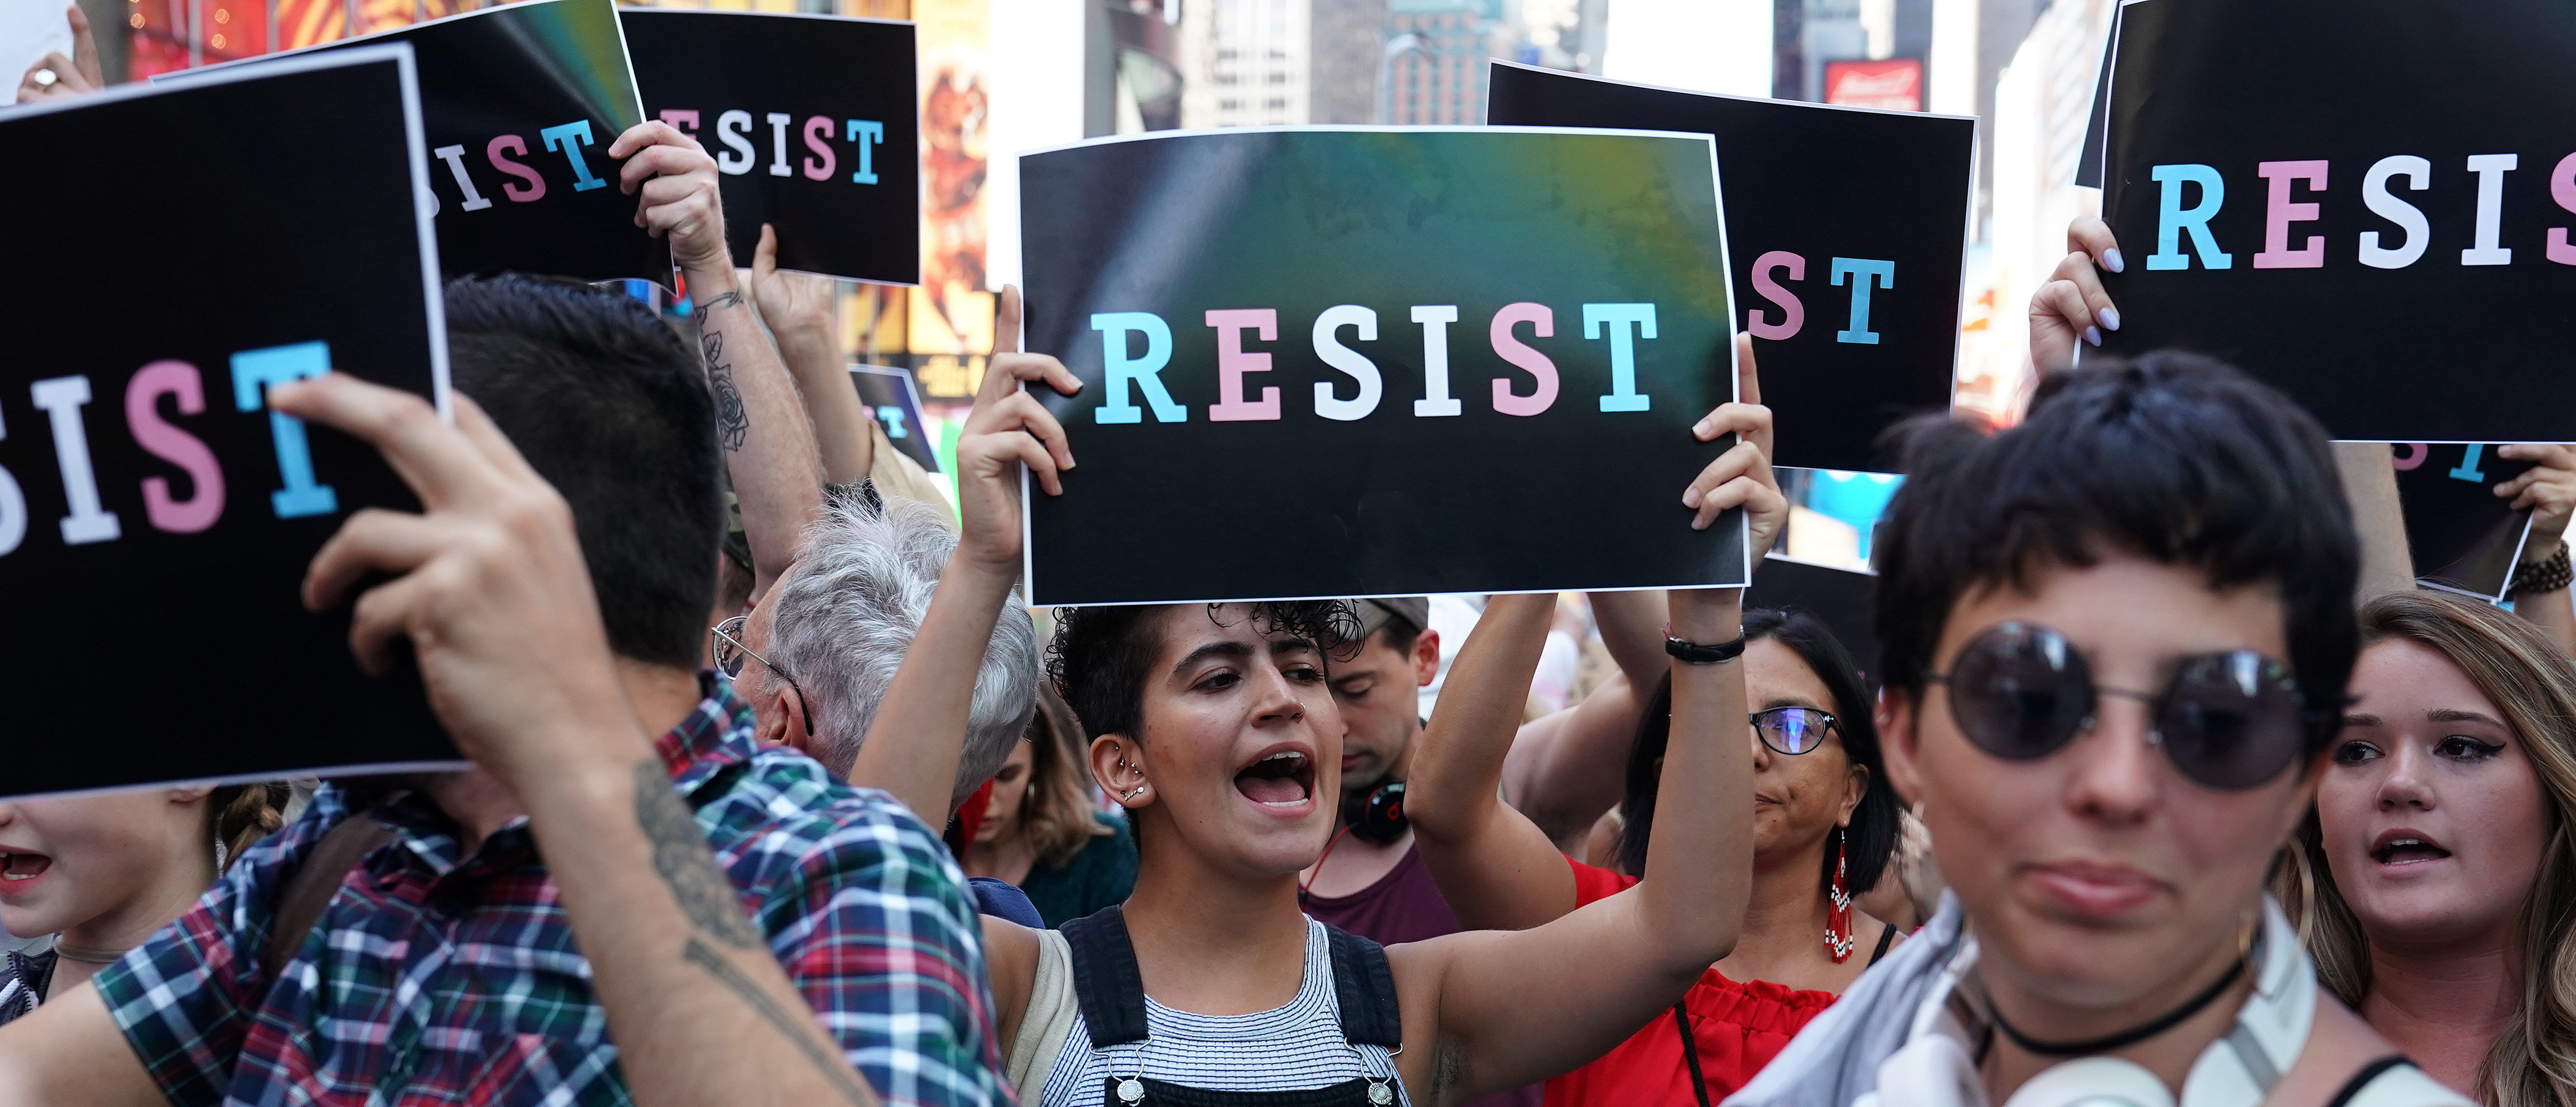 People attend a protest against U.S. President Donald Trump's announcement that he plans to reinstate a ban on transgender individuals from serving in any capacity in the U.S. military, in Times Square, in New York City, New York, U.S., July 26, 2017. REUTERS/Carlo Allegri